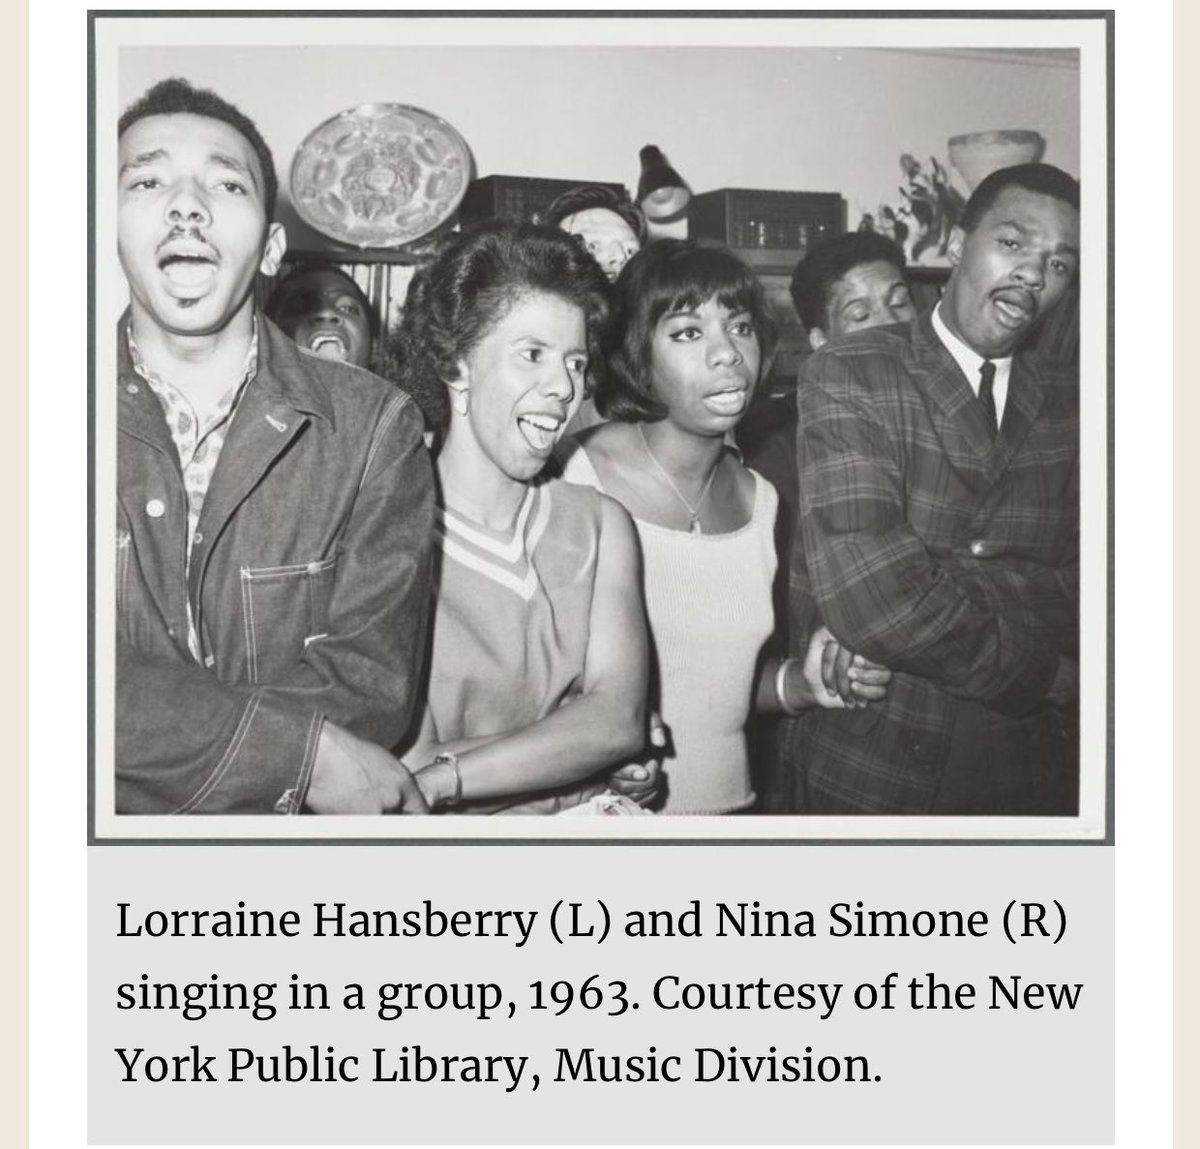 Nina Simone wrote Young, Gifted and Black for Lorraine Hansberry. Here they are together